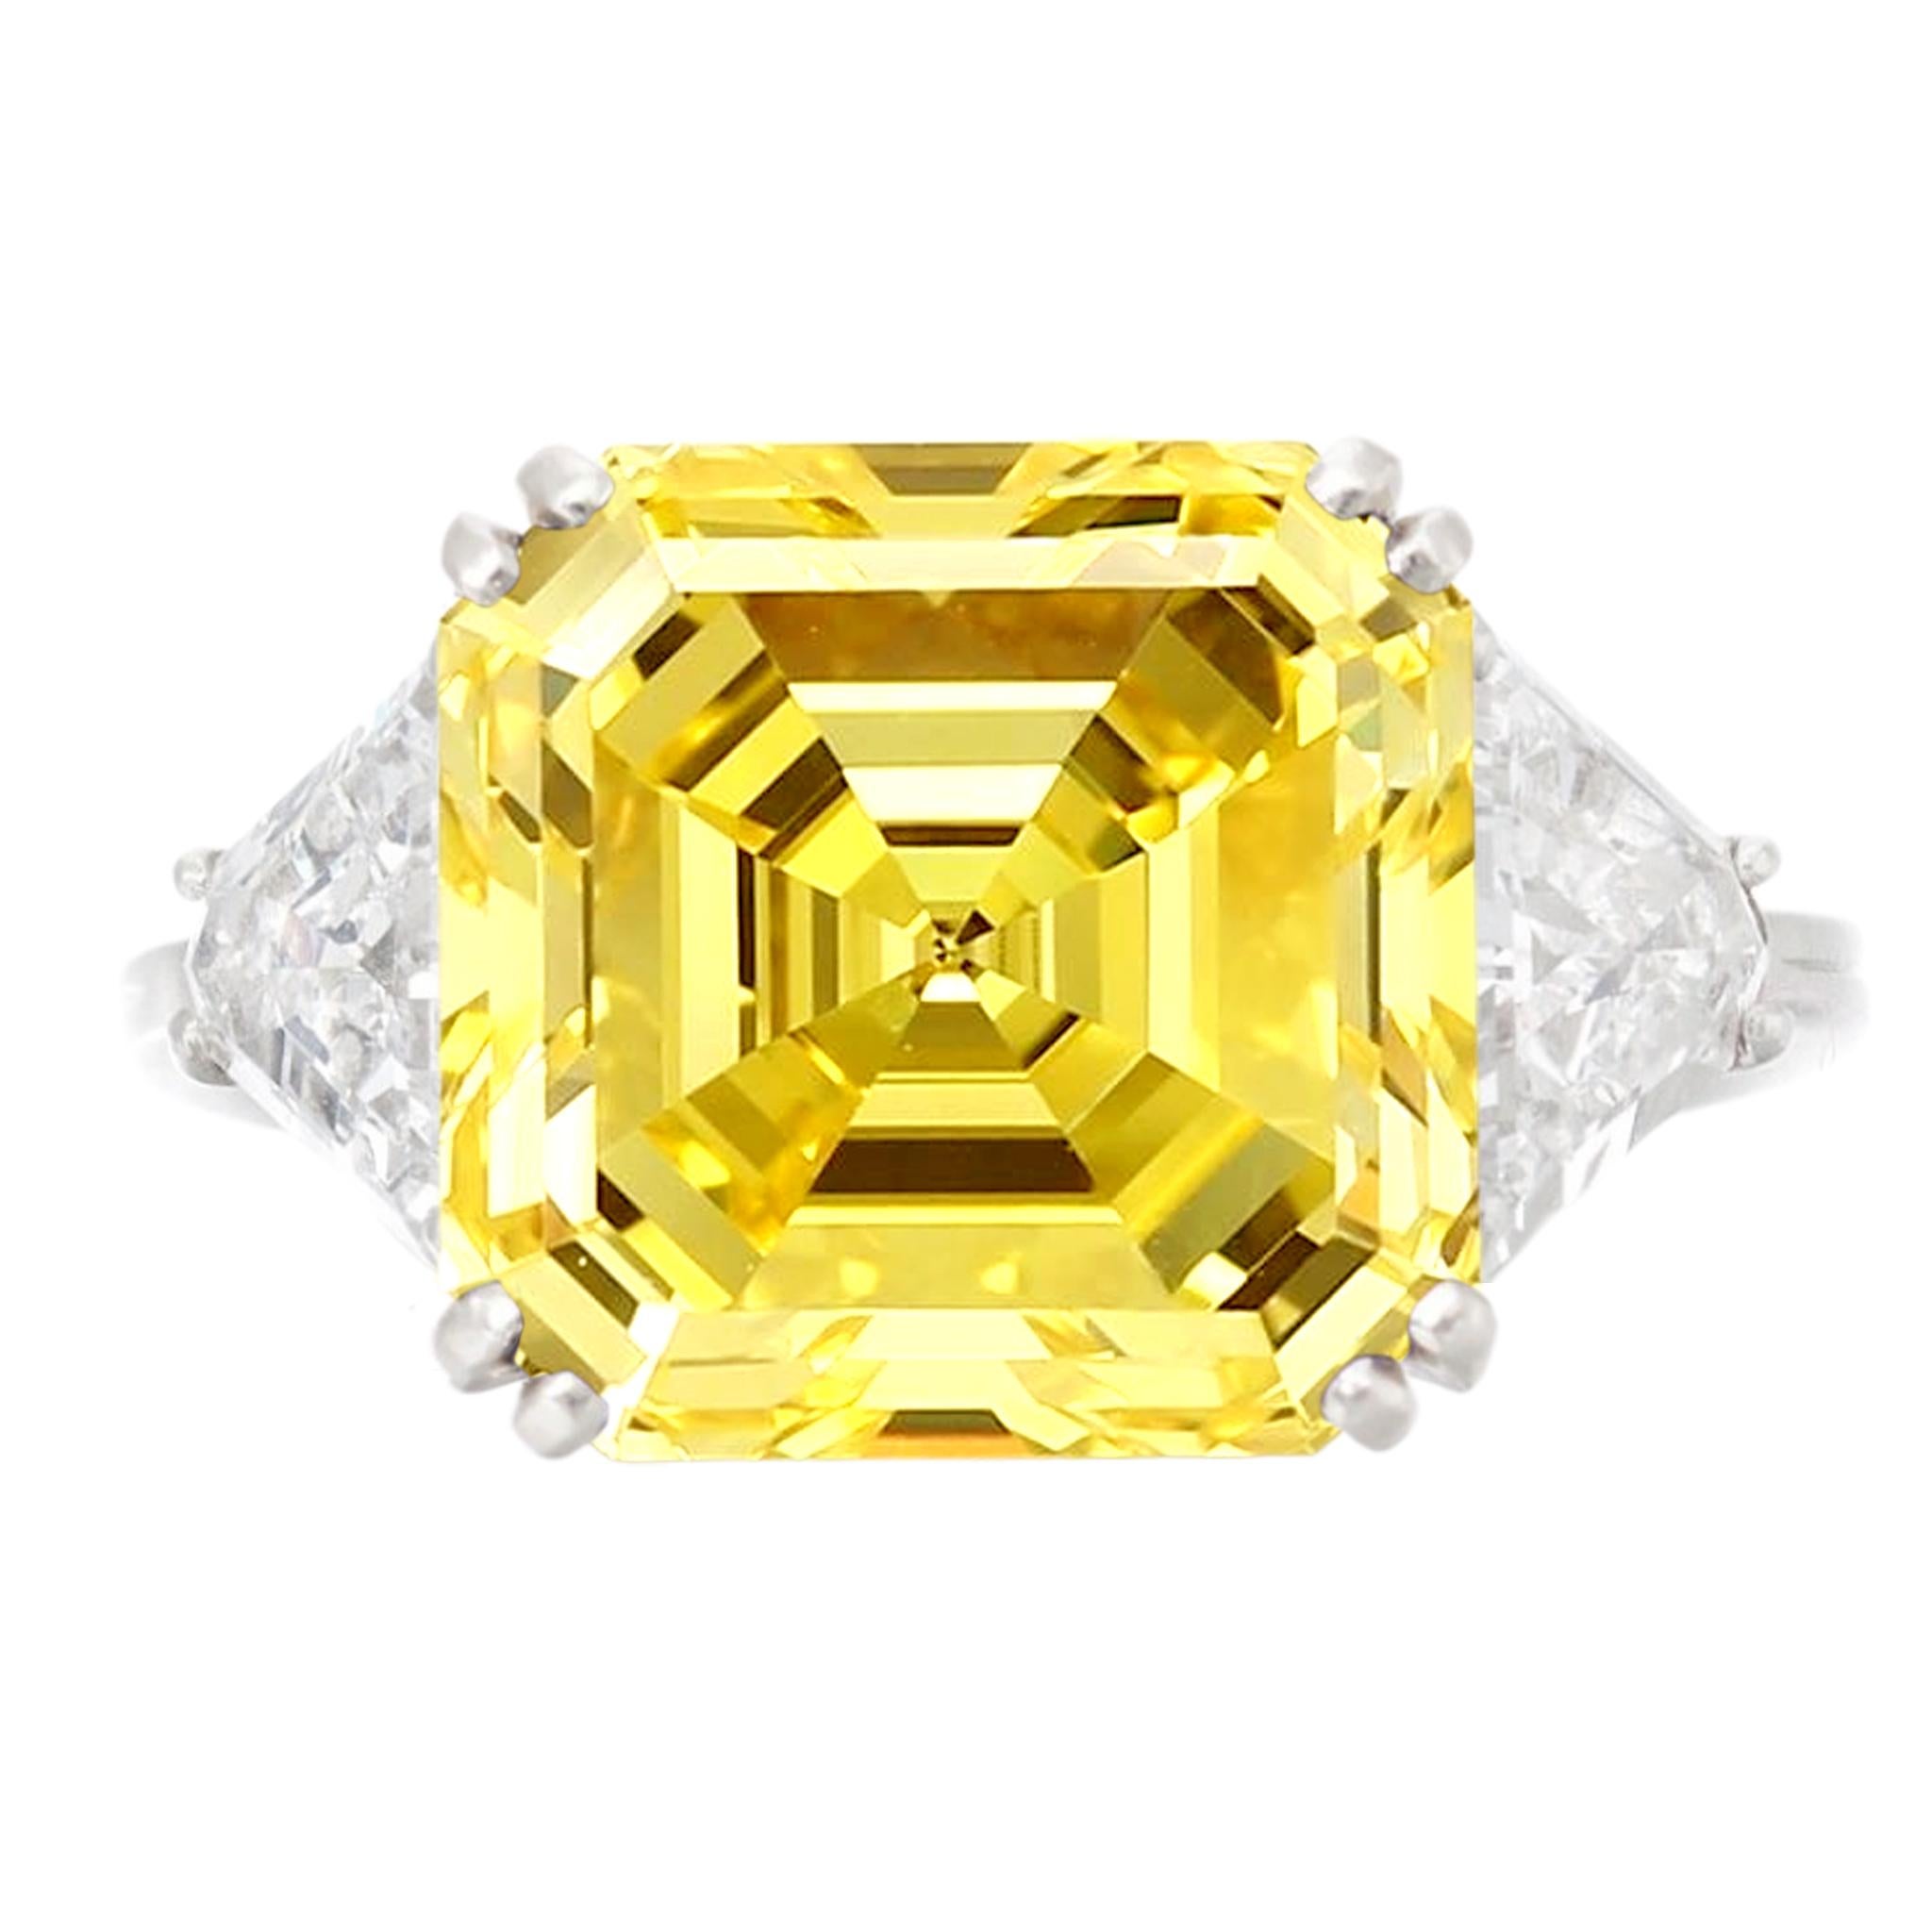 GIA Certified 3 carat emerald Cut Fancy VIVID Yellow is accompanied by a GIA certificate. This beautiful bright Asscher cut is set in a handmade 18k yellow gold setting

Love this diamond but need personalized customization? Please reach out to us,